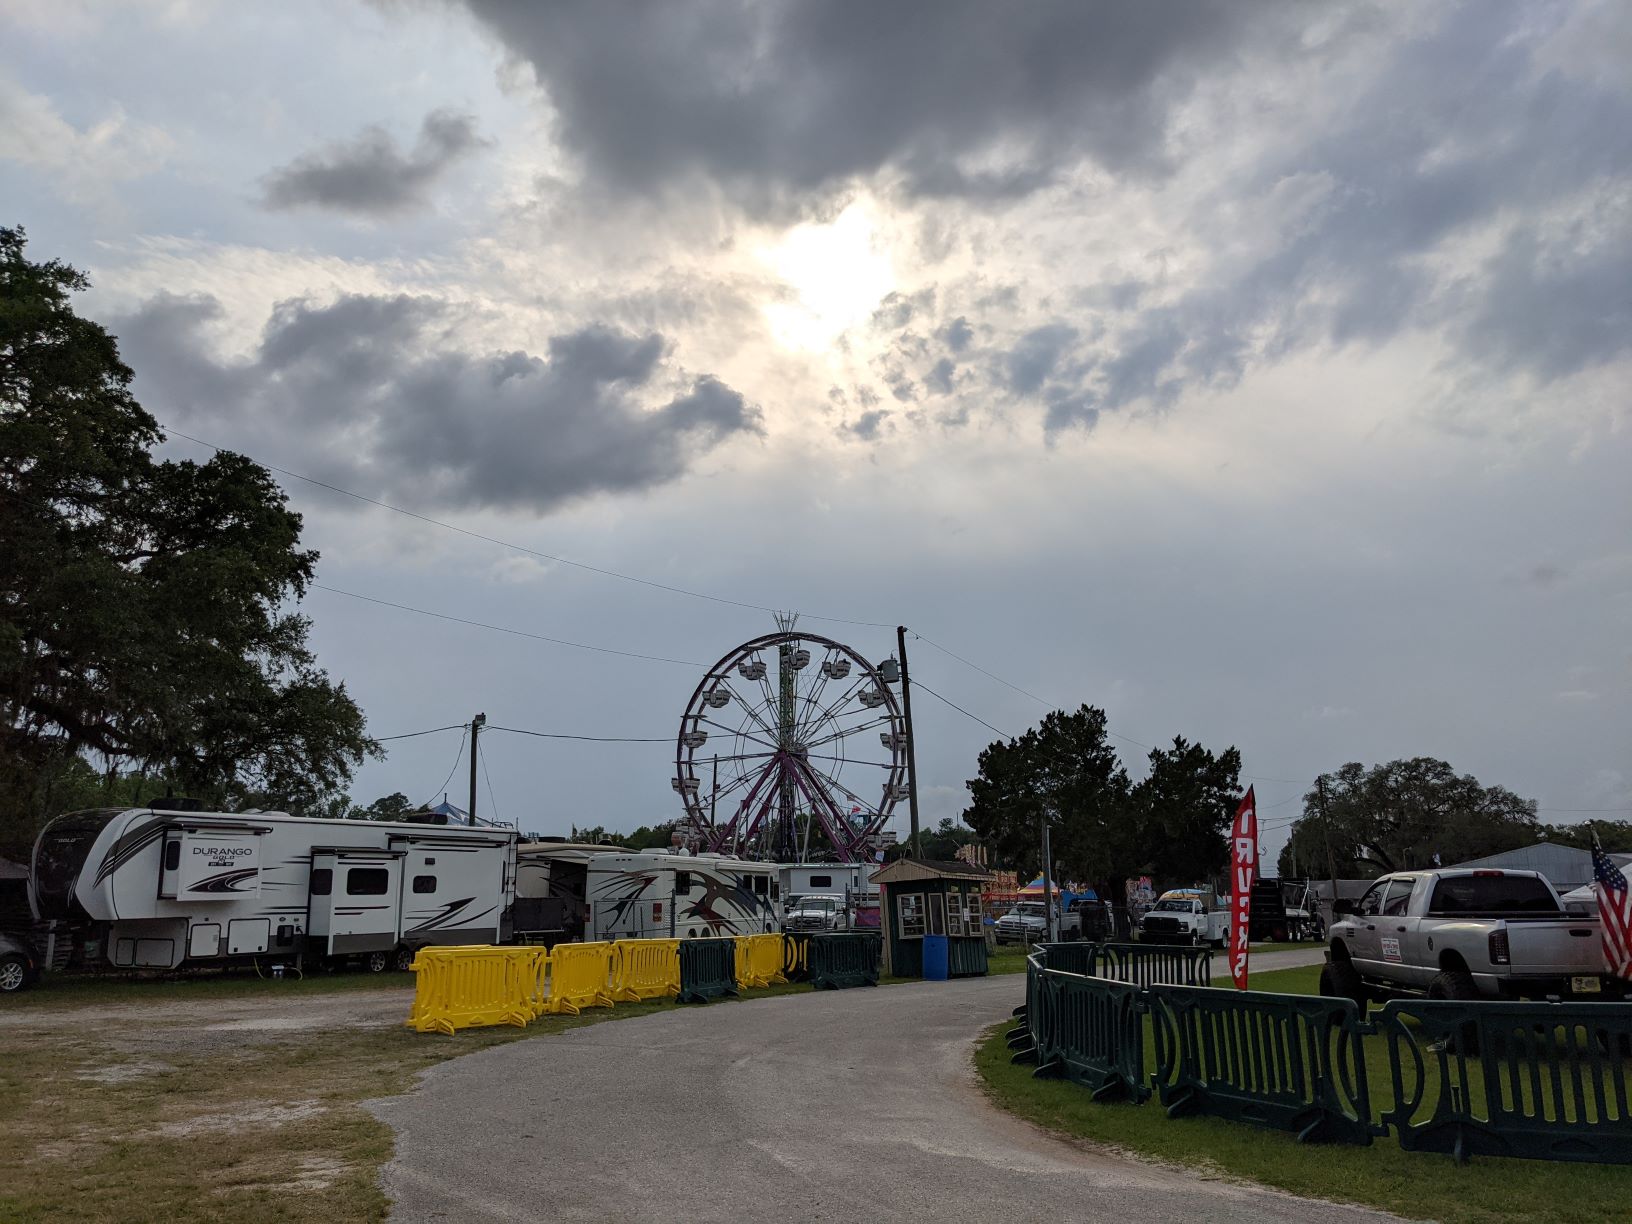 Citizens Concerned over Condition of Fairgrounds Hernando Sun